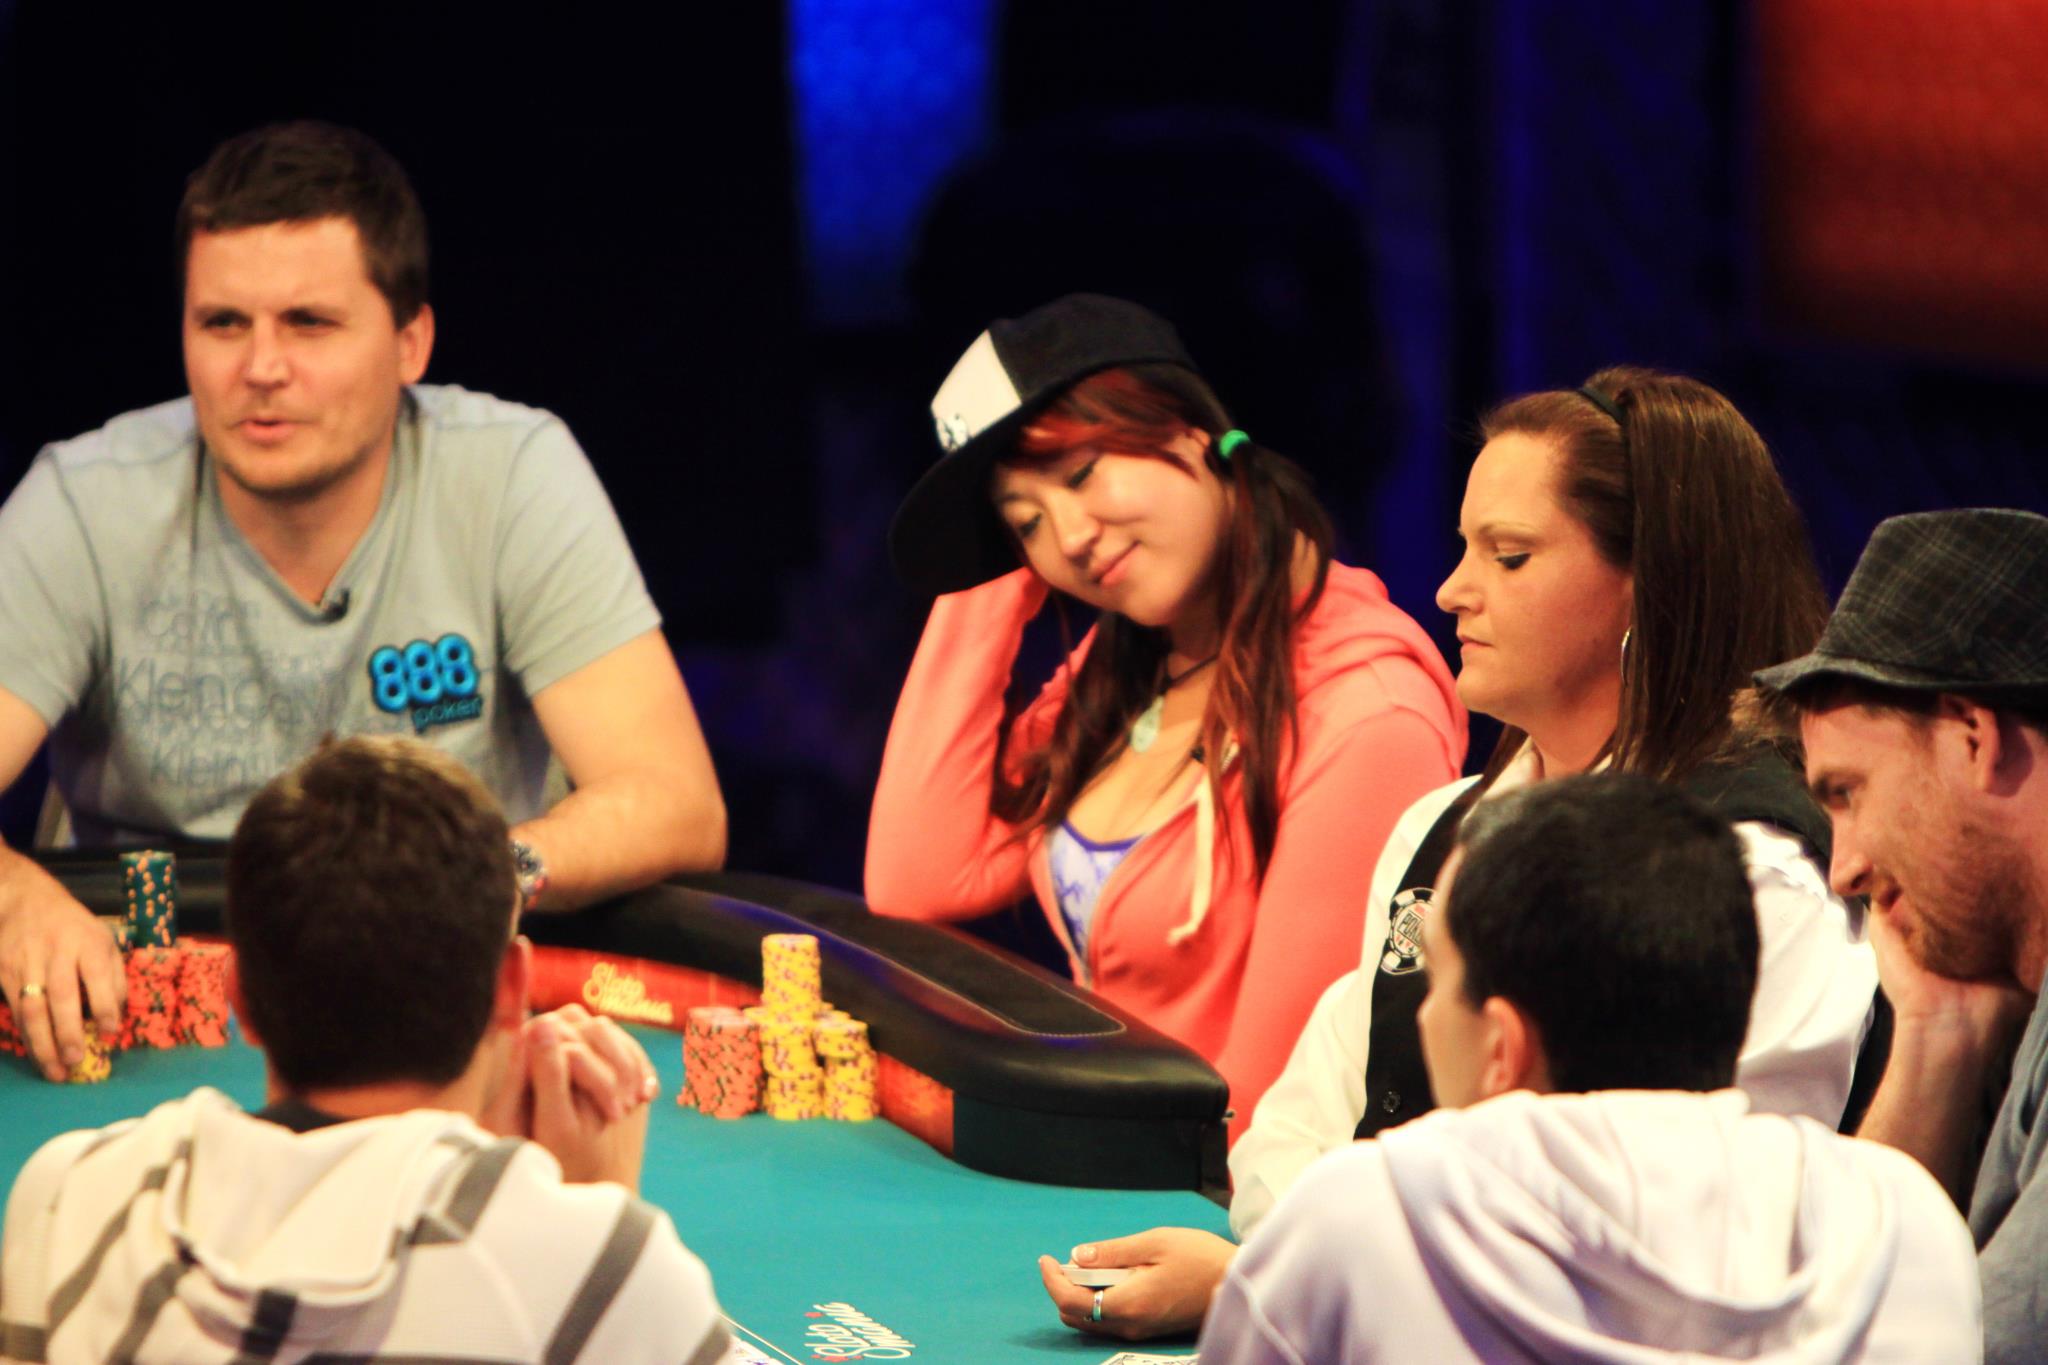 Poker pro Susie Zhao at a poker table with other players